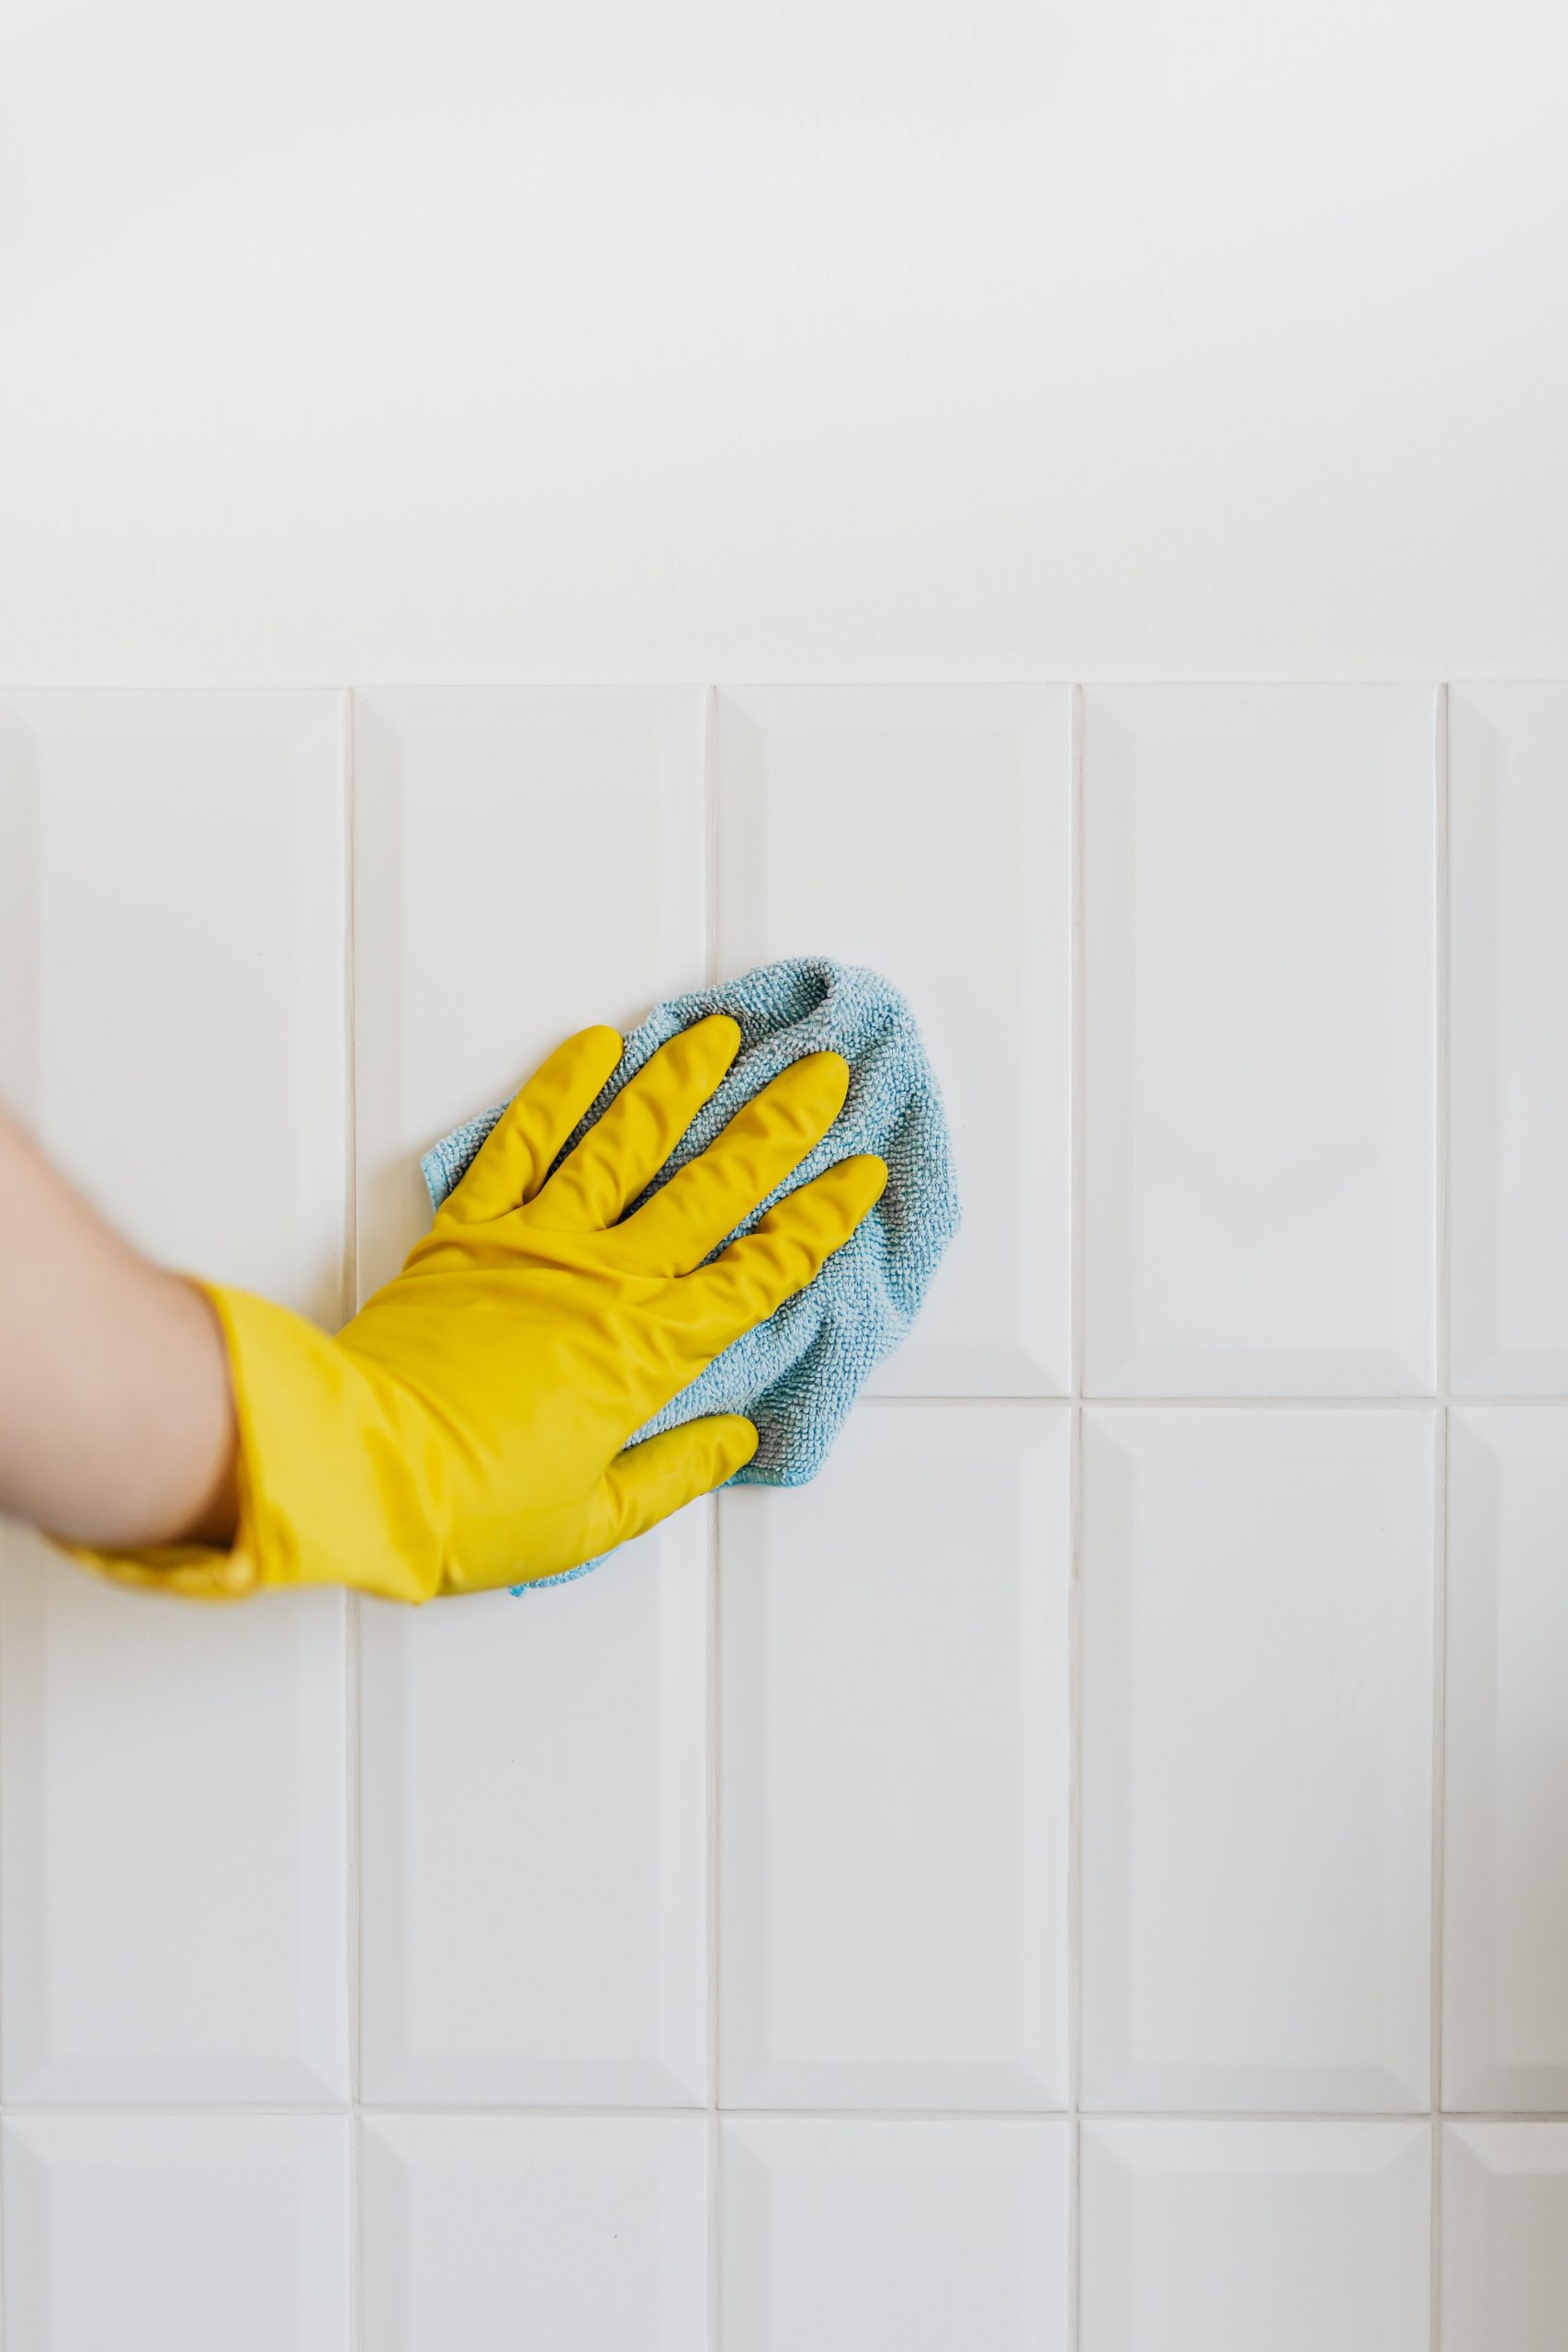 Ceramic Tile Cleaning and Sealing